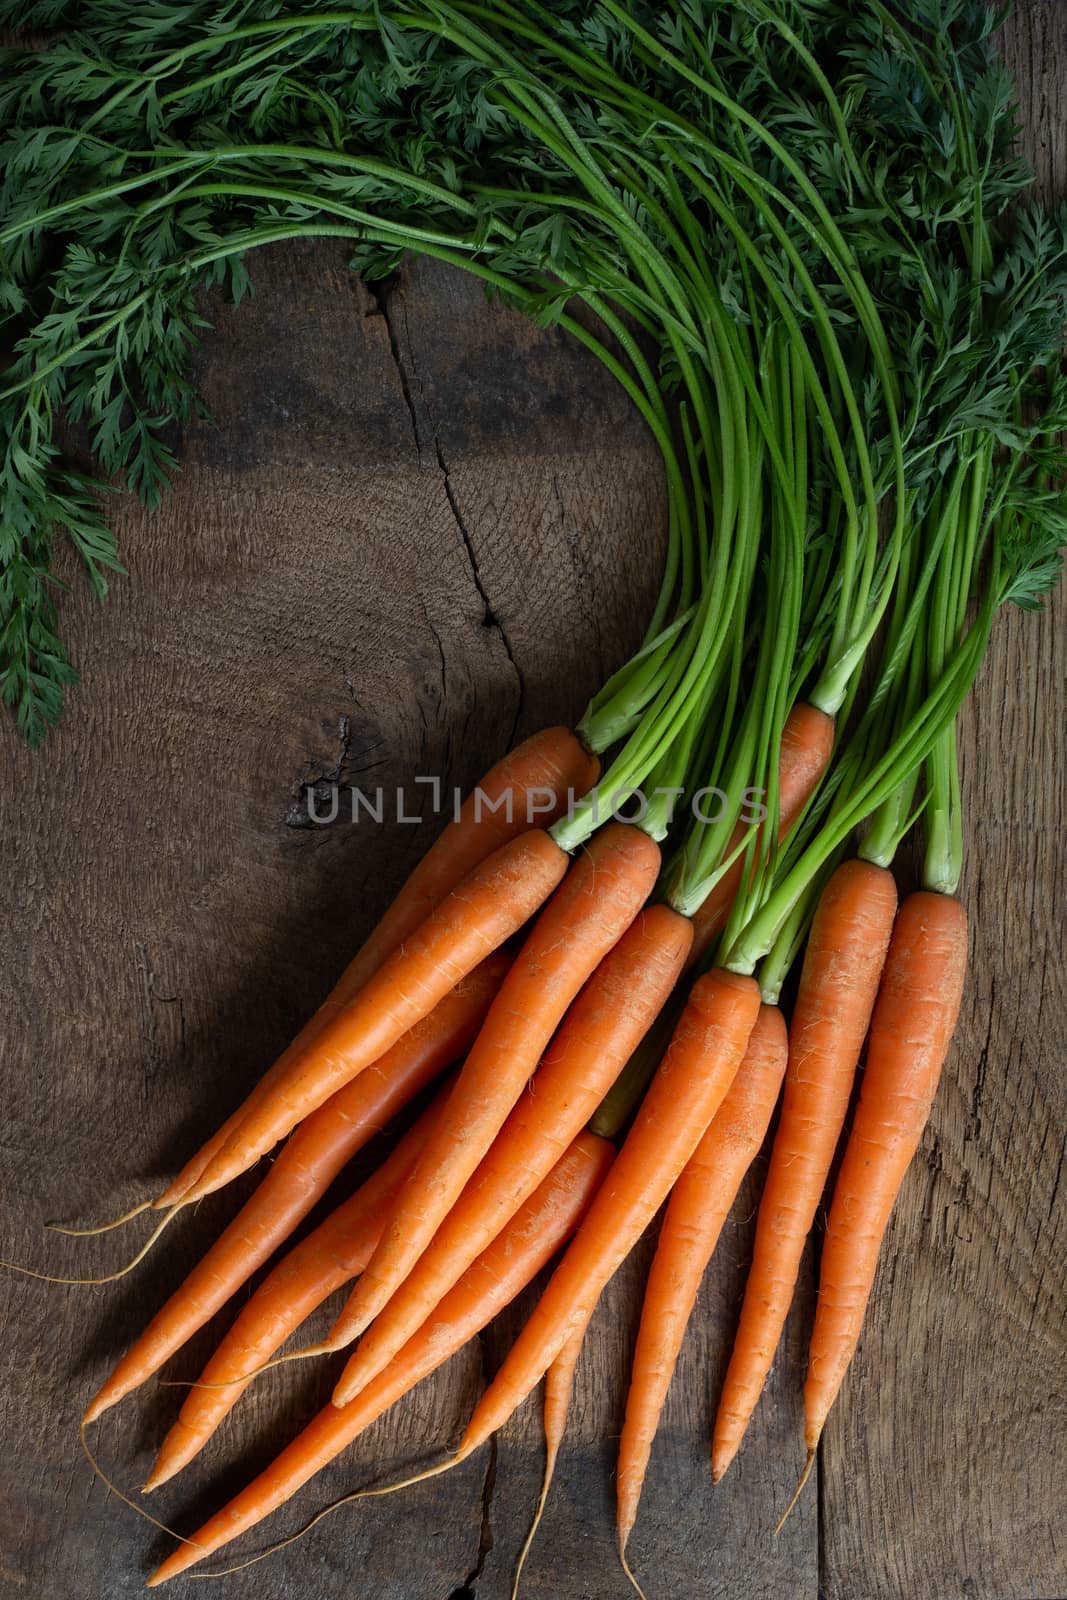 Fresh organic carrots on antique wooden table. Rustic kitchen concept